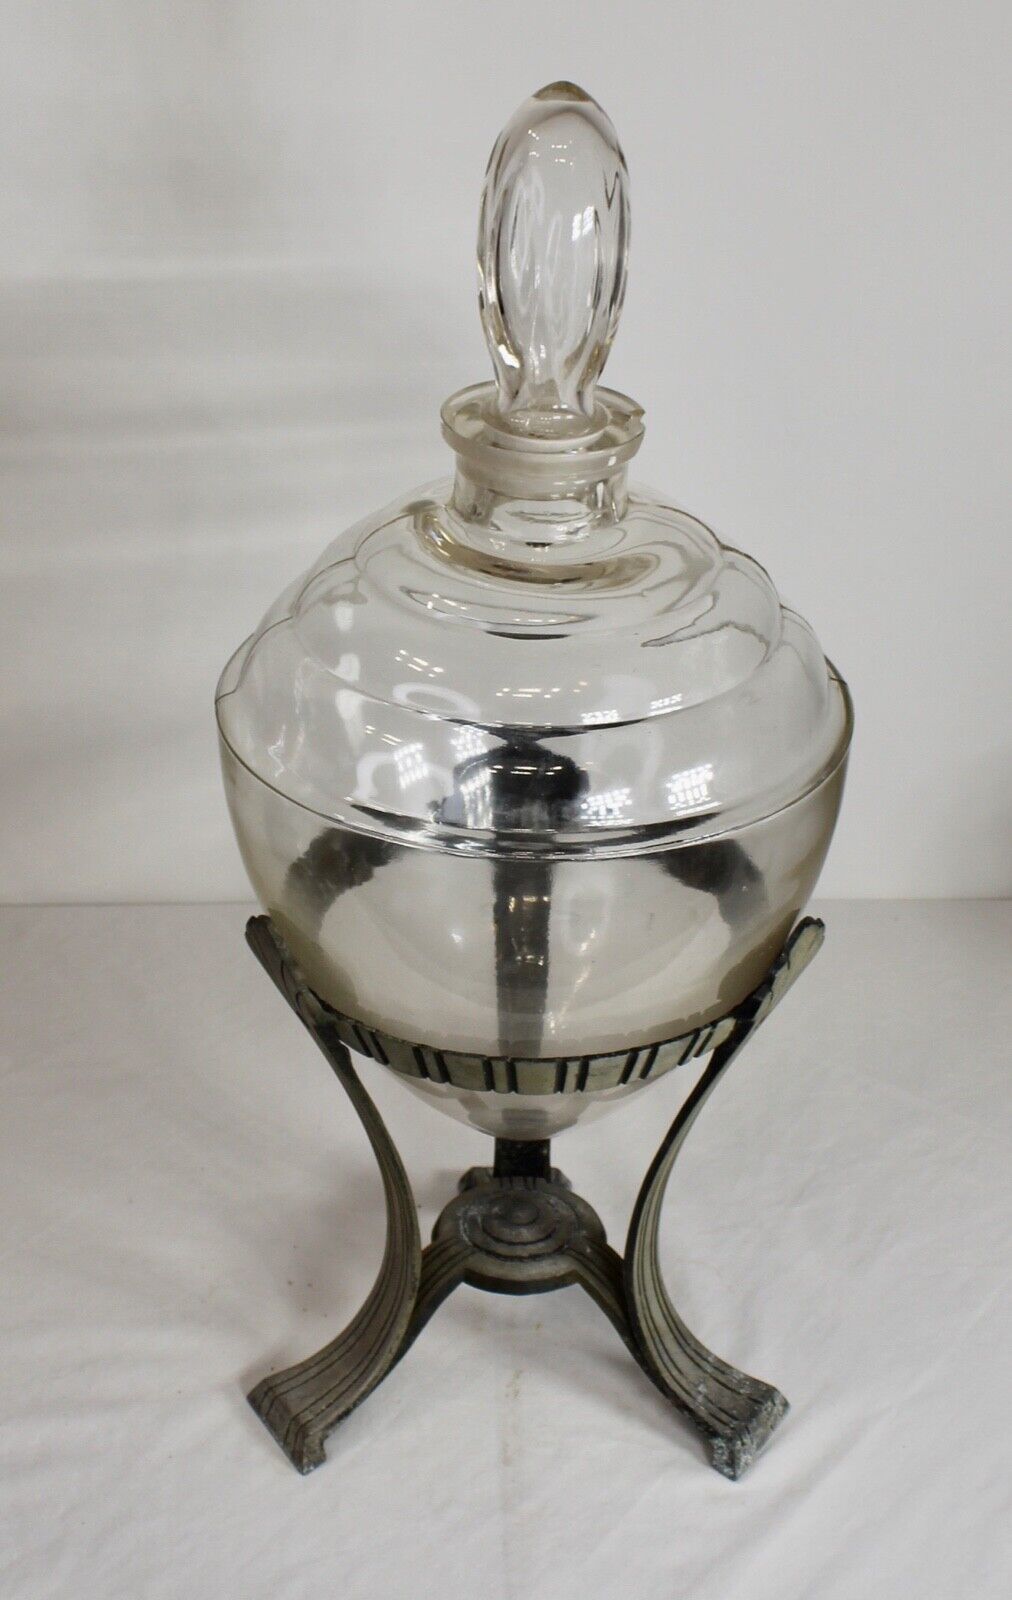 Antique Drug Store Display Glass Decanter Bee Hive Shape With Metal Stand